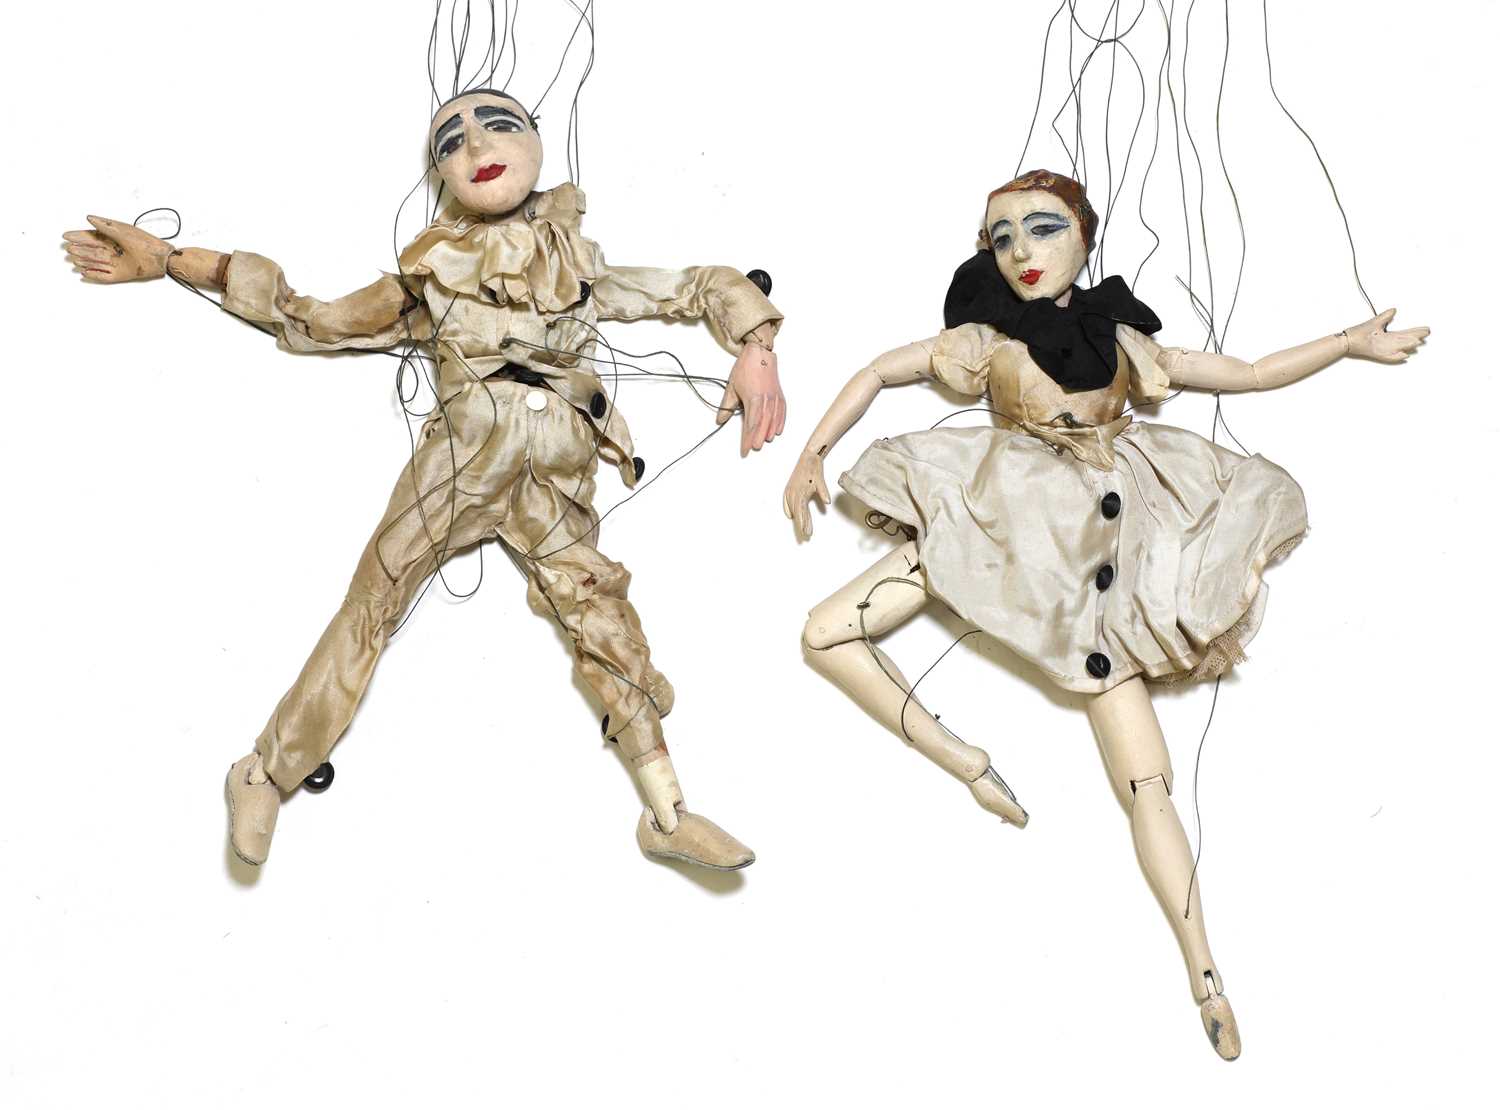 Lot 221 - The Jacquard Puppets 'Pierrot' and 'Pierette'